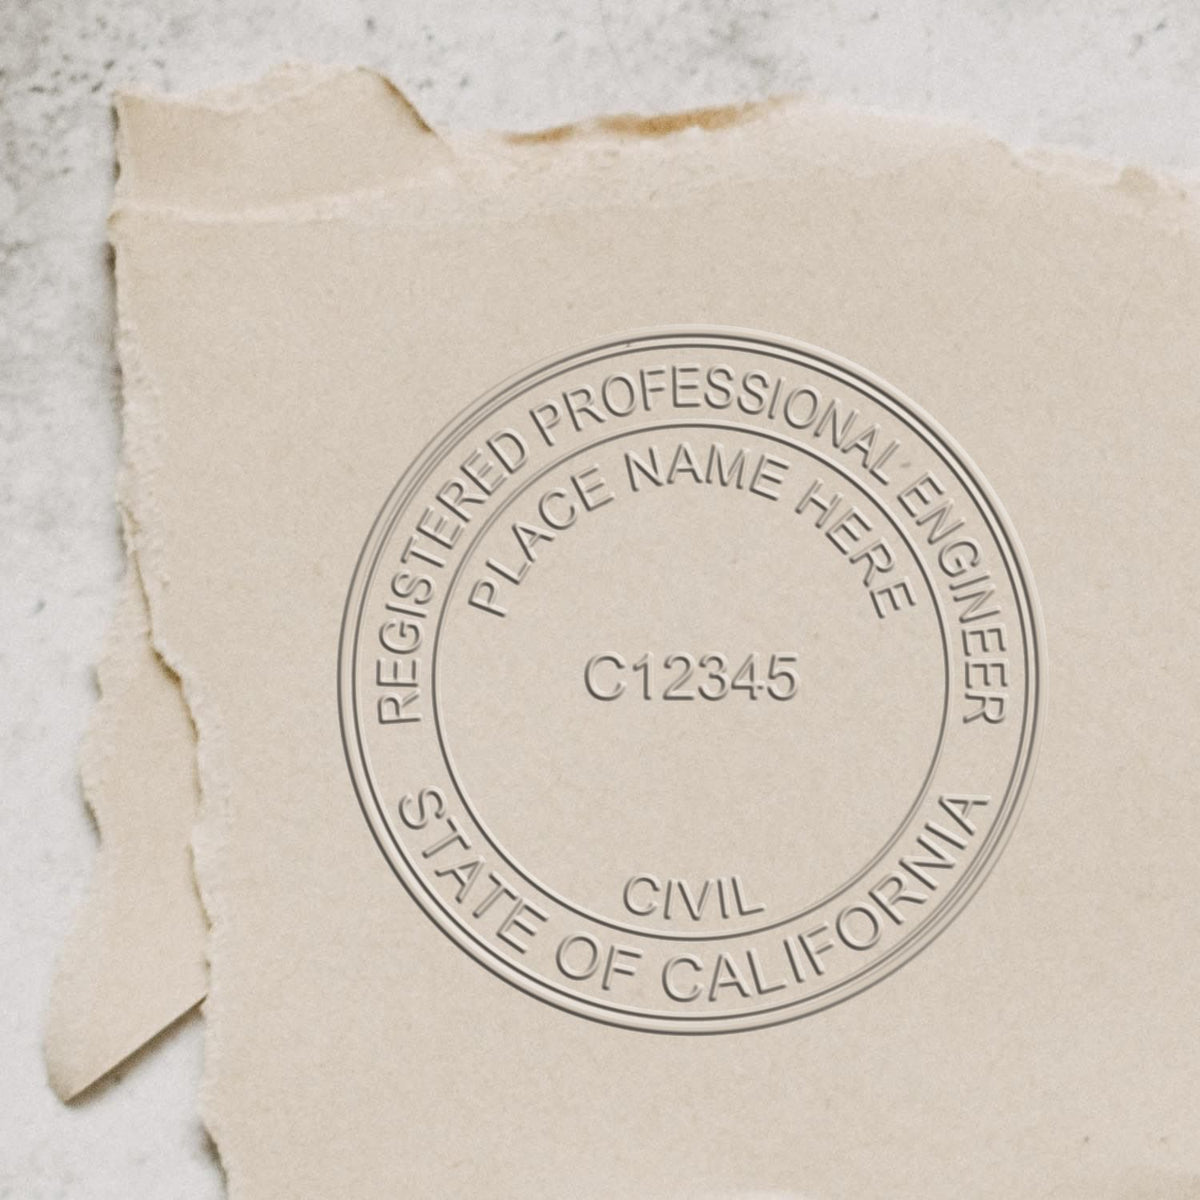 A photograph of the Hybrid California Engineer Seal stamp impression reveals a vivid, professional image of the on paper.